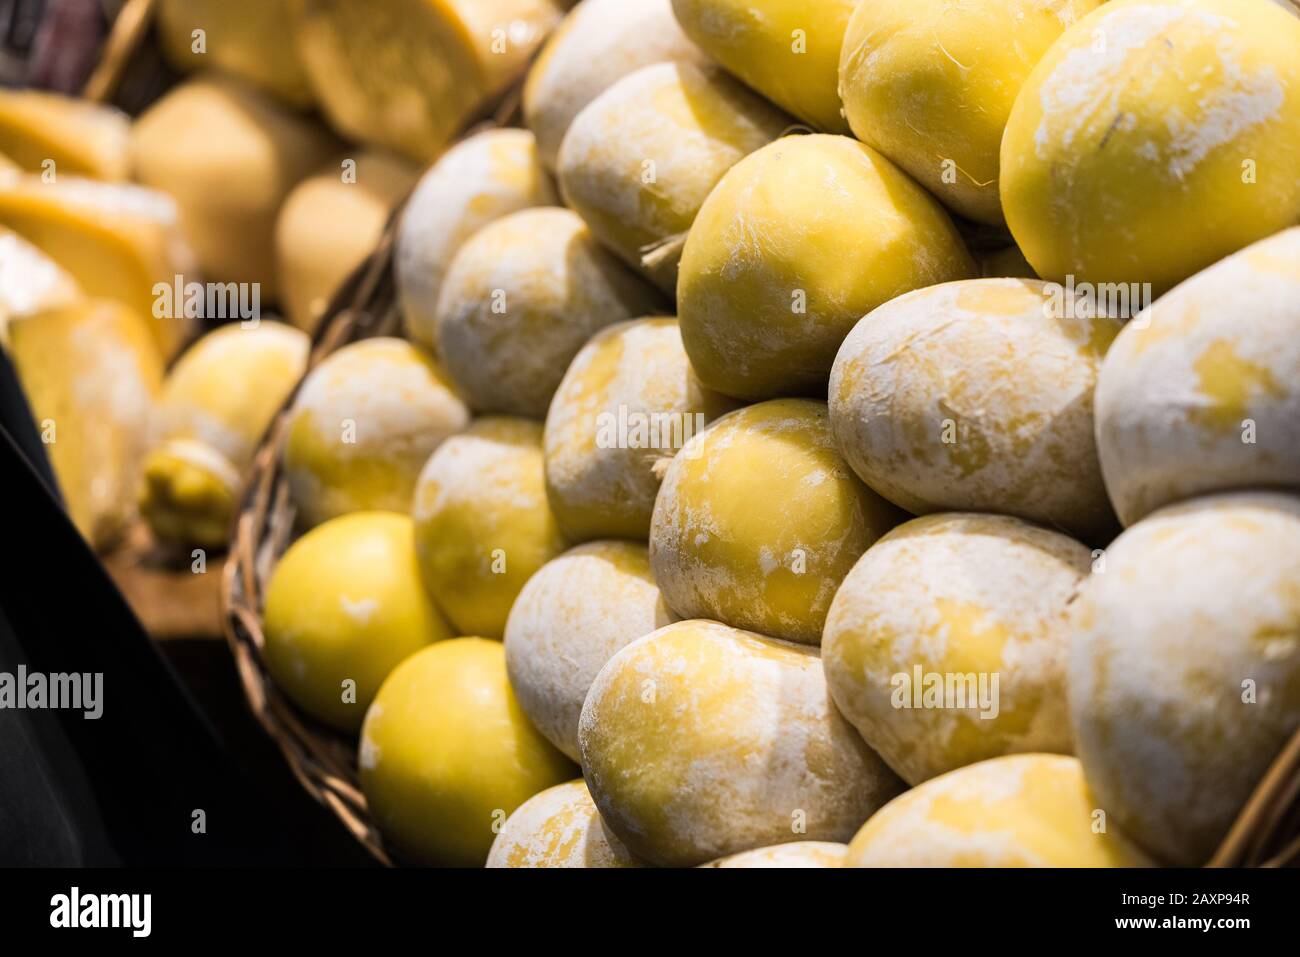 and Cuisine images scamorza hi-res - photography Alamy stock